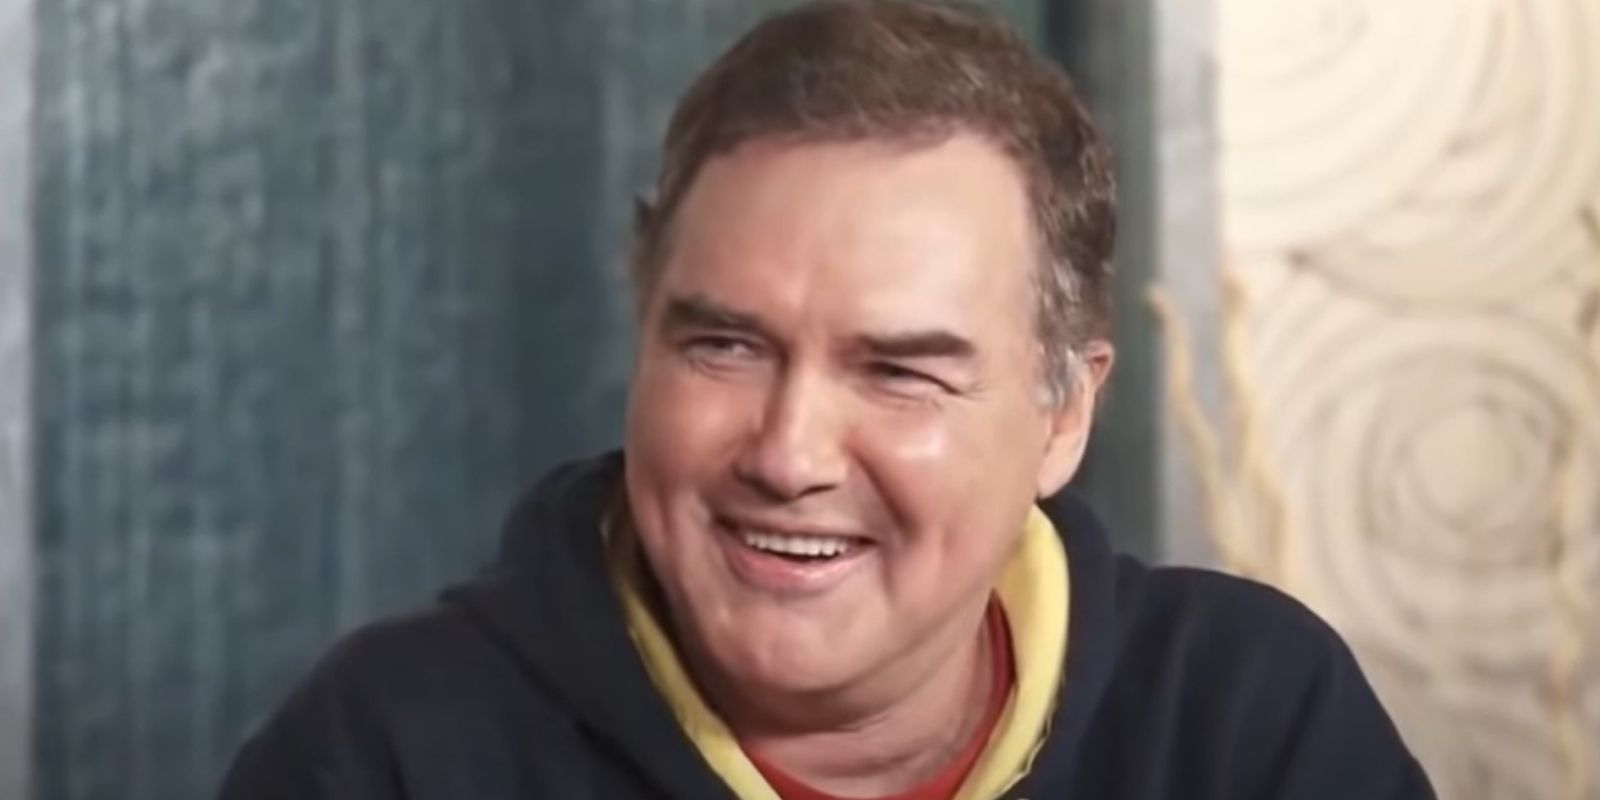 Comedy legend Norm Macdonald dies after long, private battle with cancer